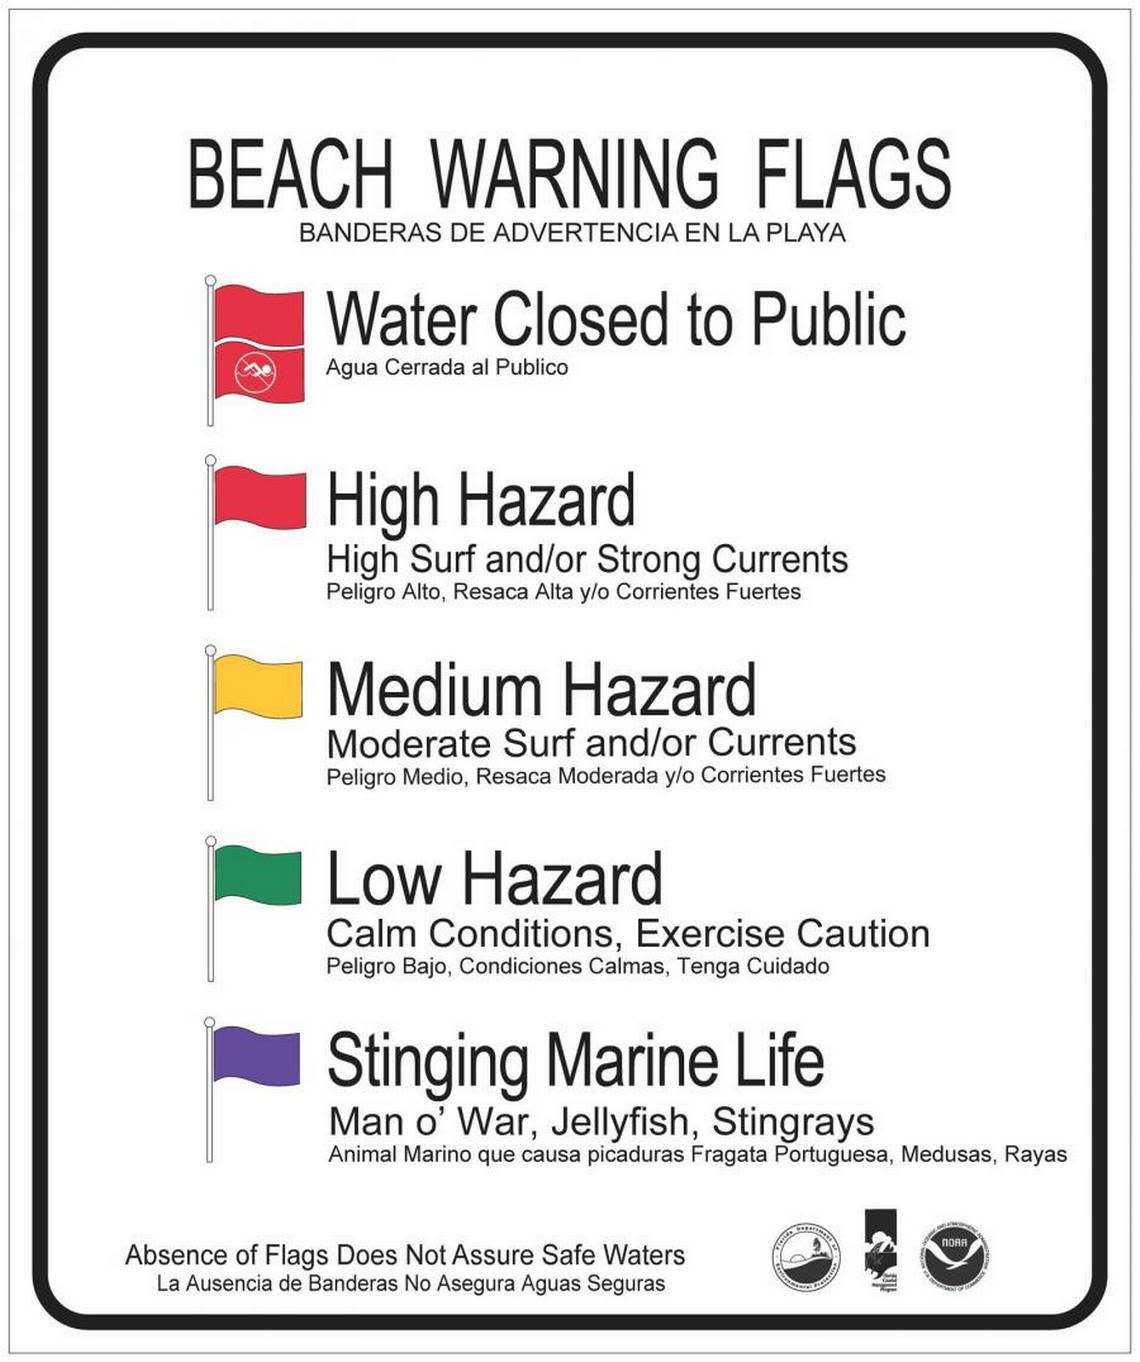 Beachfront communities in North Carolina use a five-flag system to keep visitors informed about potential hazards in and near the water.